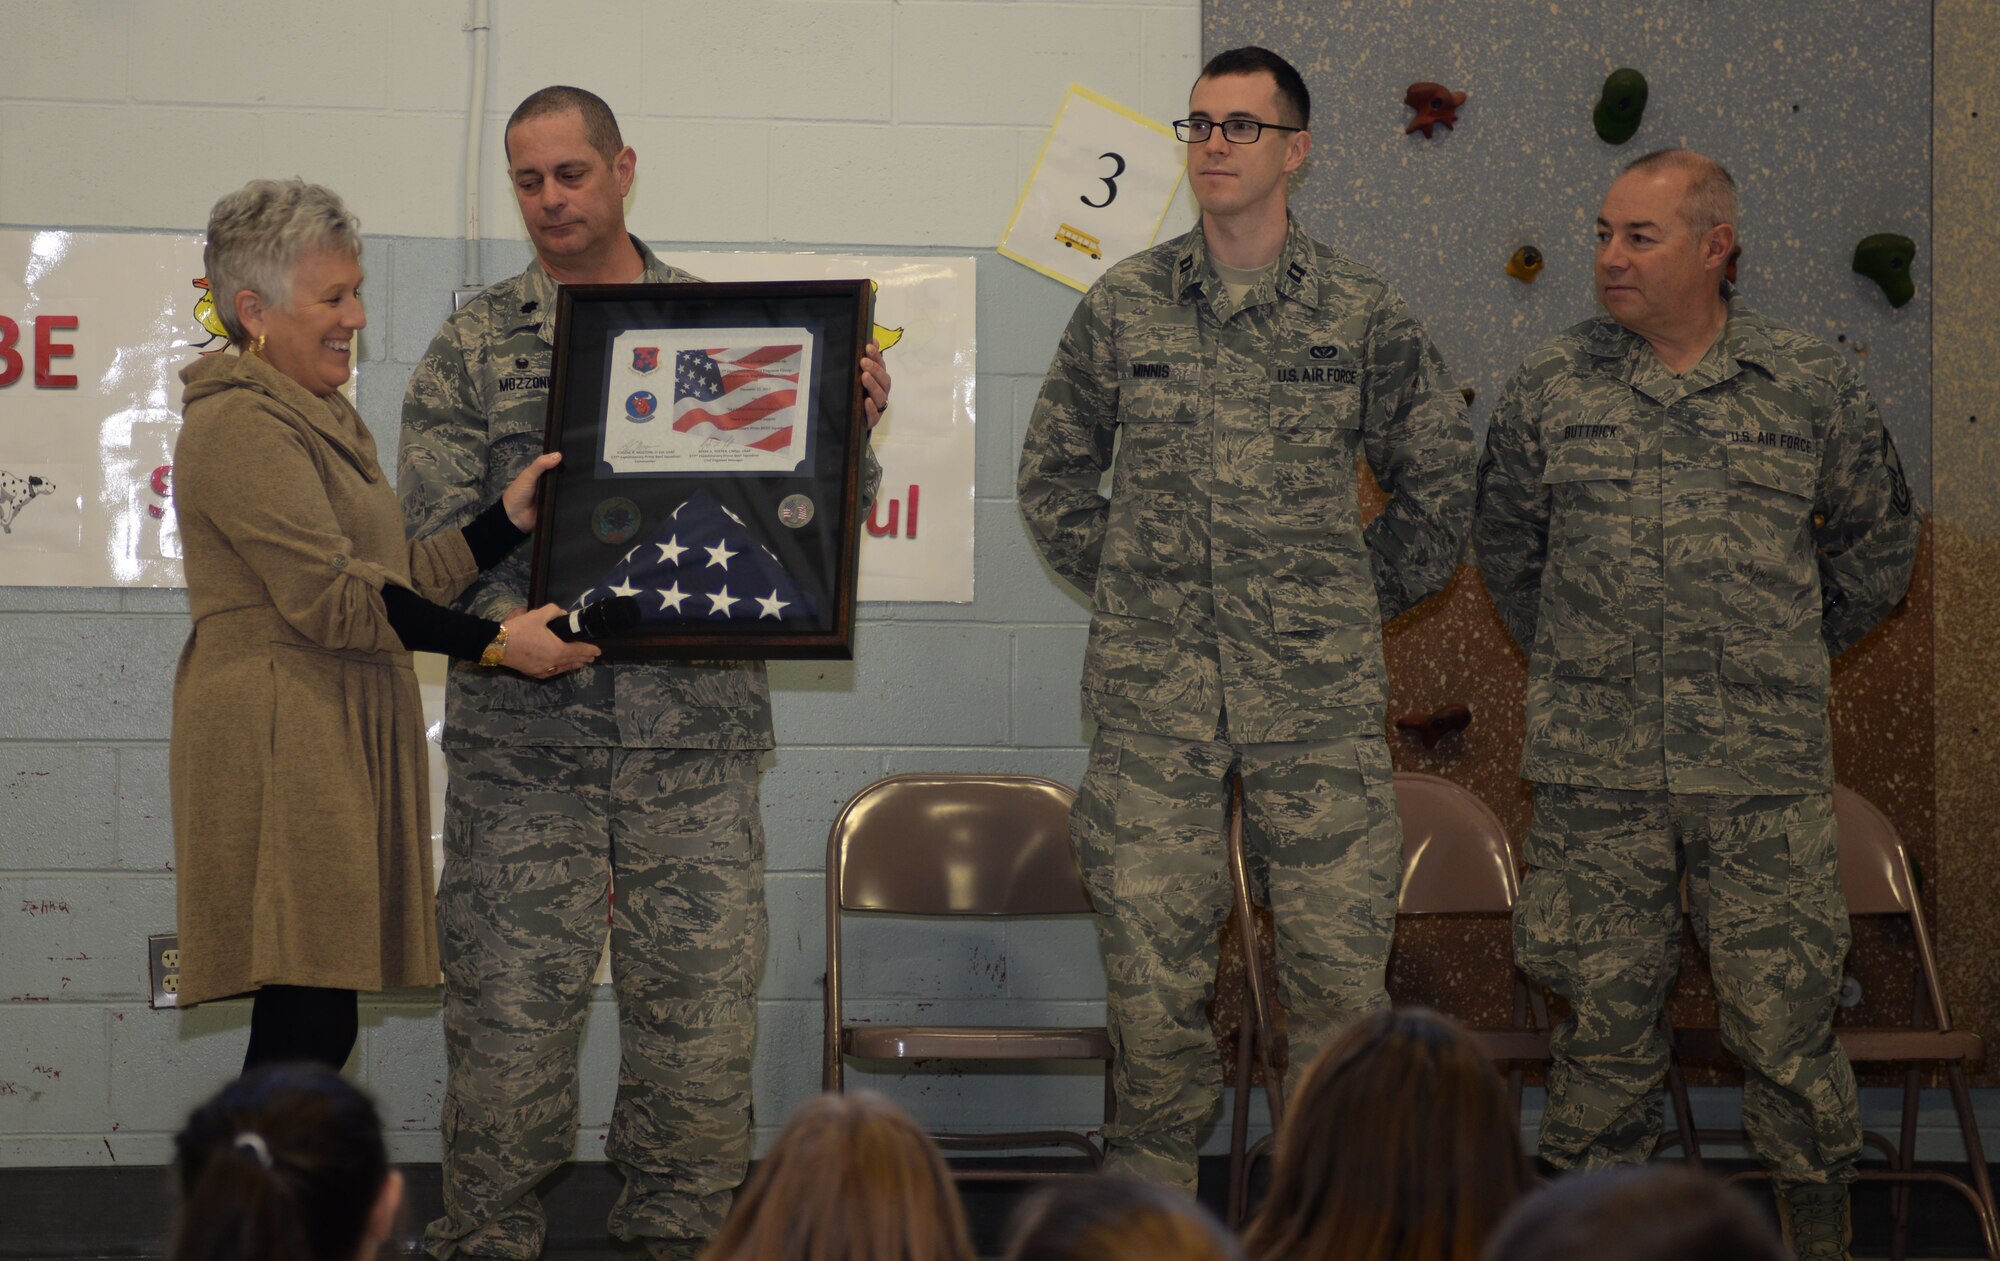 Michelle McAlister, principal for the McClelland Elementary School, accepts a flag and certificate from Lt. Col. Eugene R. Mozzoni, commander of the 157th Civil Engineering Squadron, Captain Erik Minnis and Chief Master Sgt. Todd Buttick, New Hampshire Air National Guard, during a ceremony thanking the students for sending letters to the 157th Civil Engineer Squadron while the unit was deployed to the middle east over the 2017 holiday season, March 27, 2018, Rochester, N.H.  The flag was flown over the country of Kuwait during Christmas while the squadron was deployed there. (N. H. Air National Guard photo by Master Sgt. Thomas Johnson)